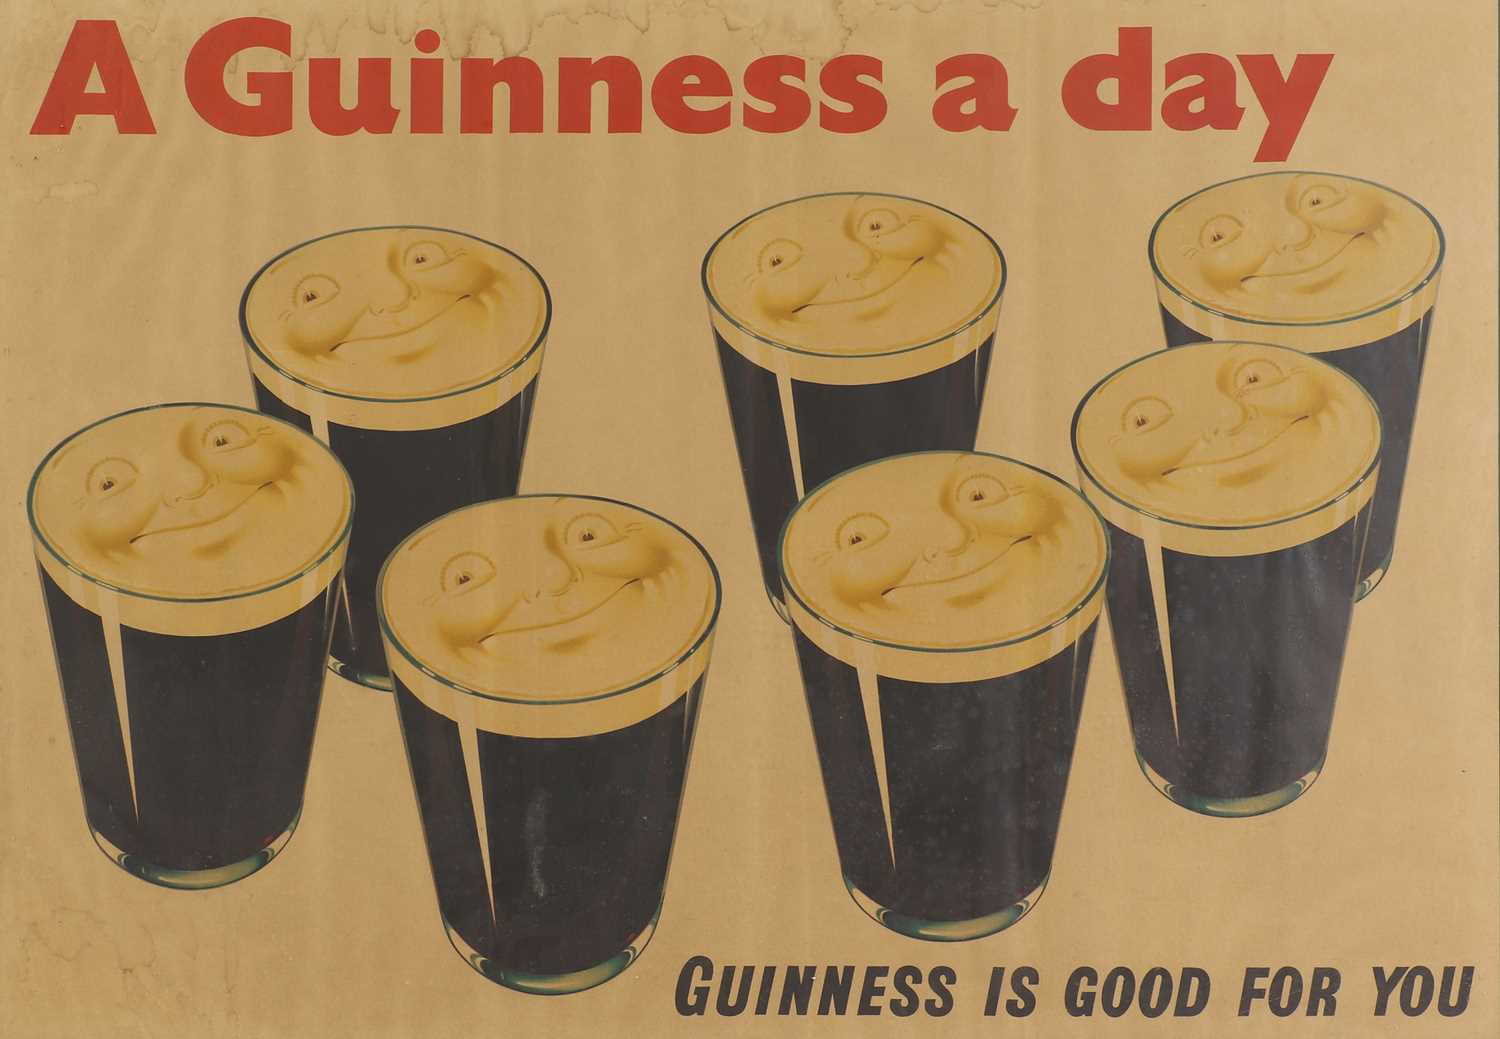 Lot 193 - 'A Guinness a Day - Guinness is Good For You'